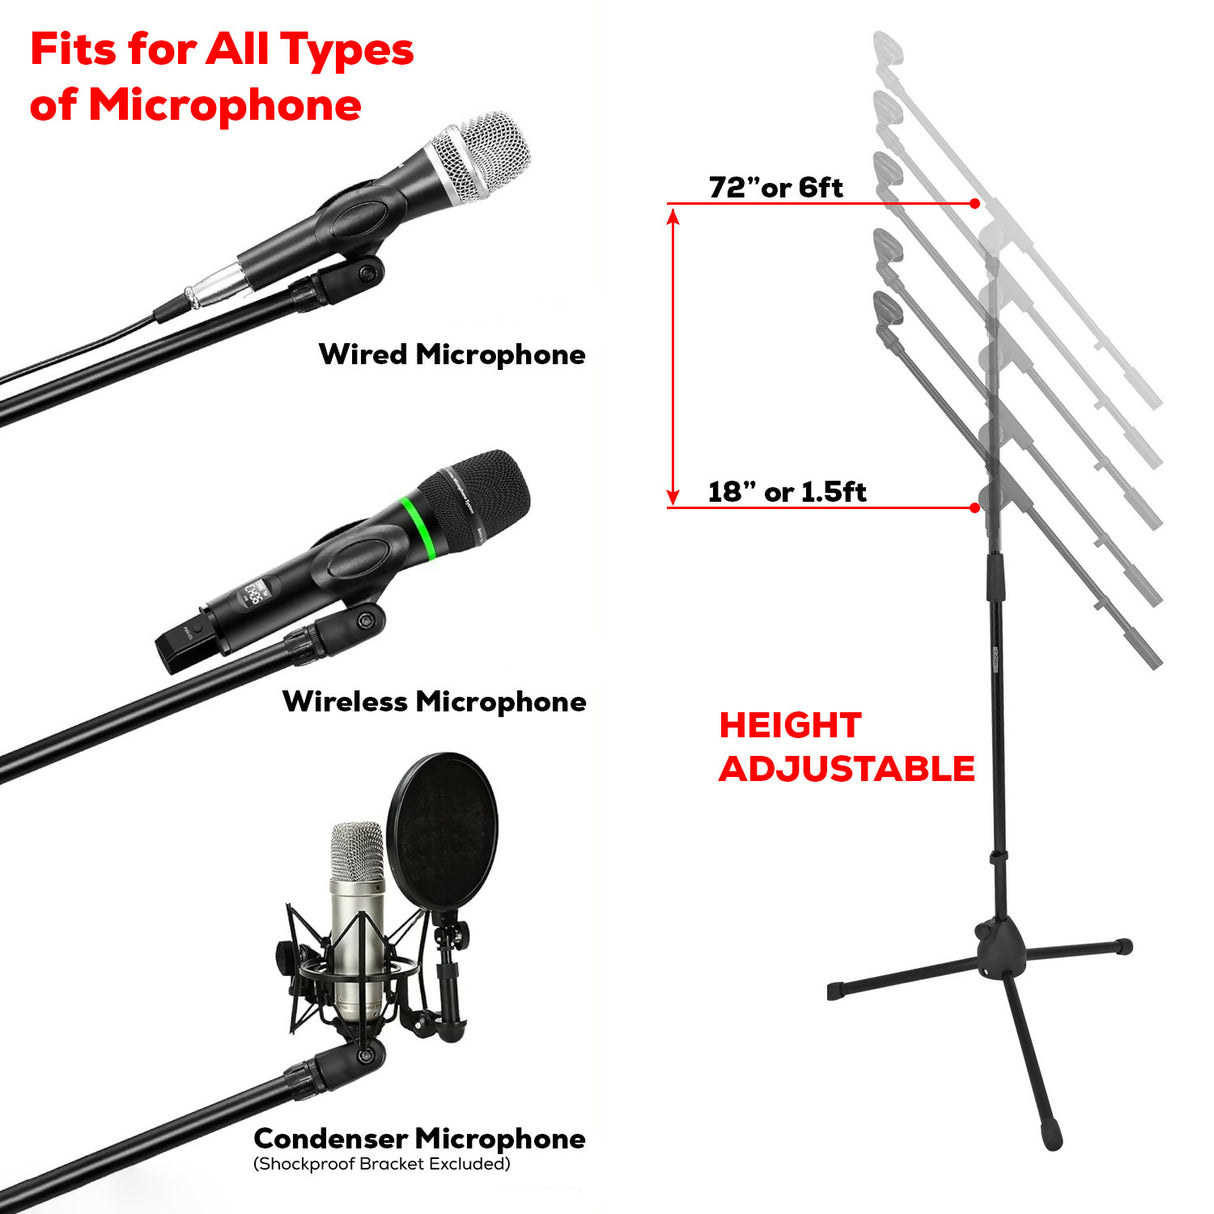 5 Core Handheld Dynamic Microphone and Tripod Metal Stand Kit w Unidirectional Vocal Wired XLR Mic